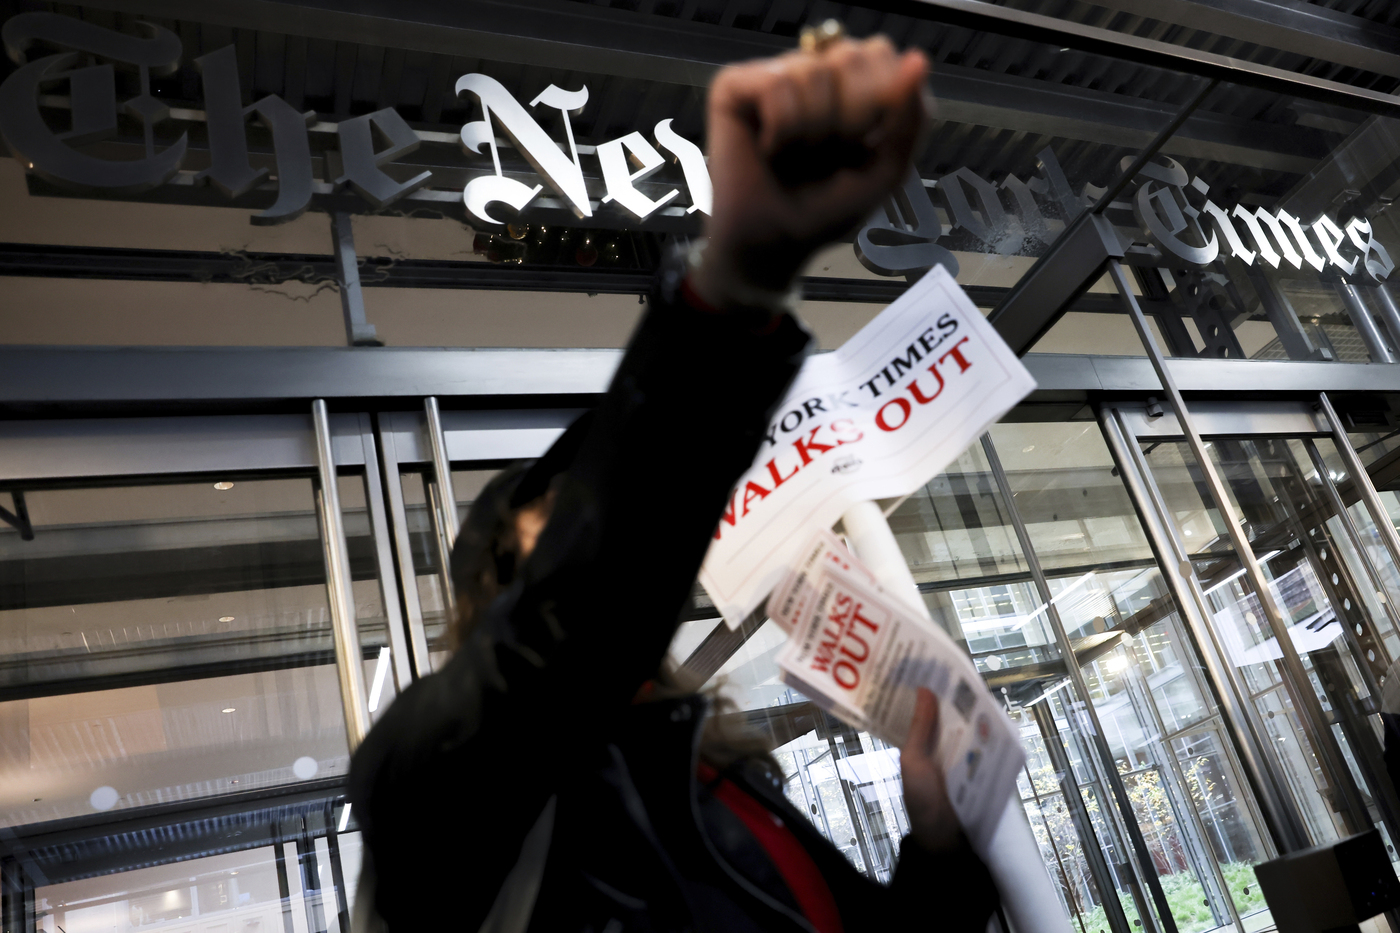 Hundreds of New York Times journalists and other staff protest outside the Times' office after walking off the job for 24 hours, frustrated by contract negotiations that have dragged on for months in the newspaper's biggest labor dispute in more than 40 years, Thursday, Dec. 8, 2022, in New York. (AP Photo/Julia Nikhinson)